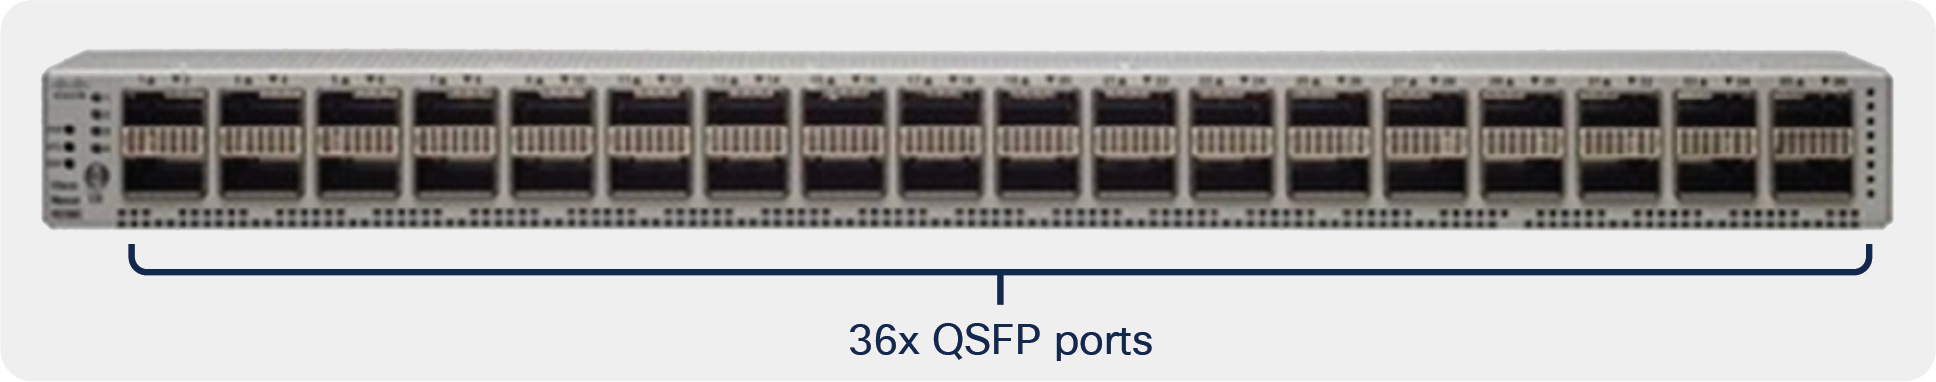 Switch that supports high-density QSFP downlinks with breakout